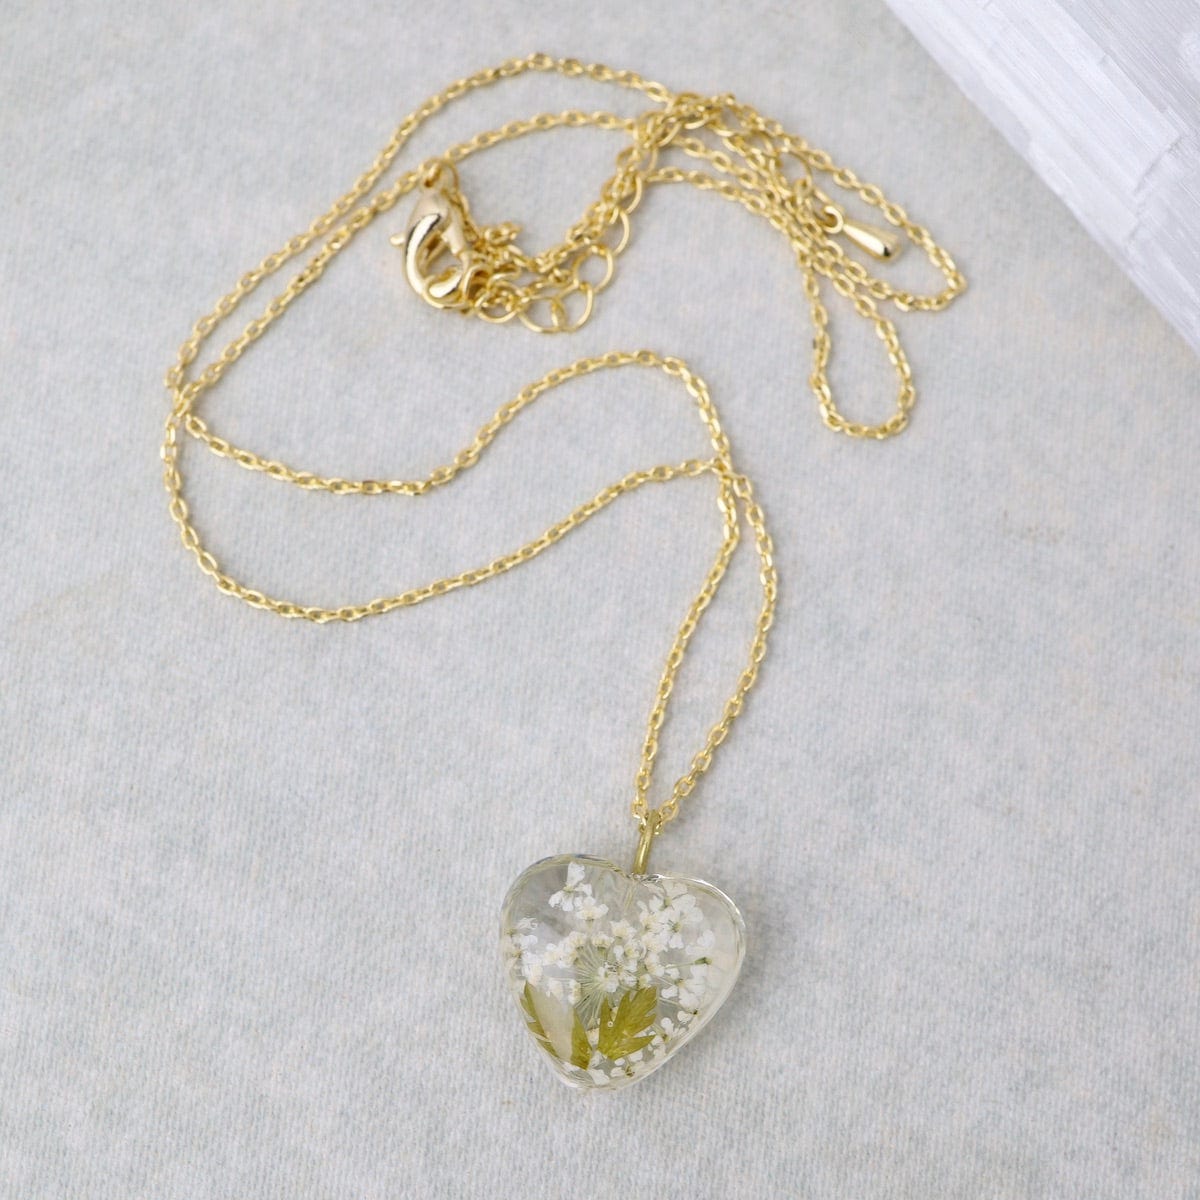 NKL-GPL Botanical Mini Heart Necklace - Hawthorn May Birthday Month